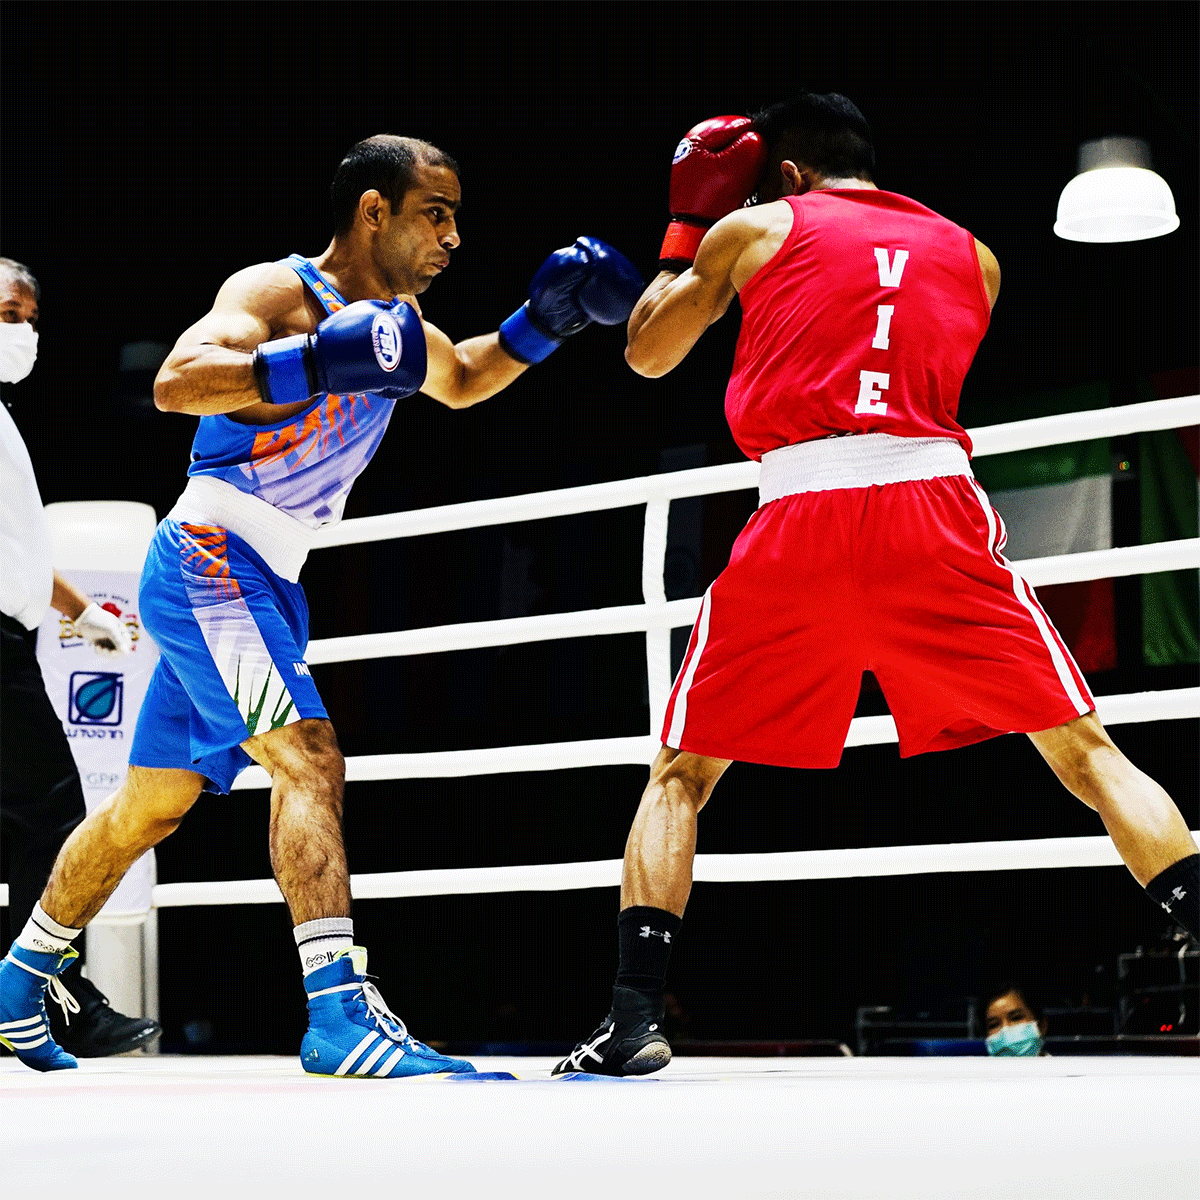 India's Amit Panghal in action against Tran Van Thao of Vietnam during their 54 kg semi-final bout on Friday